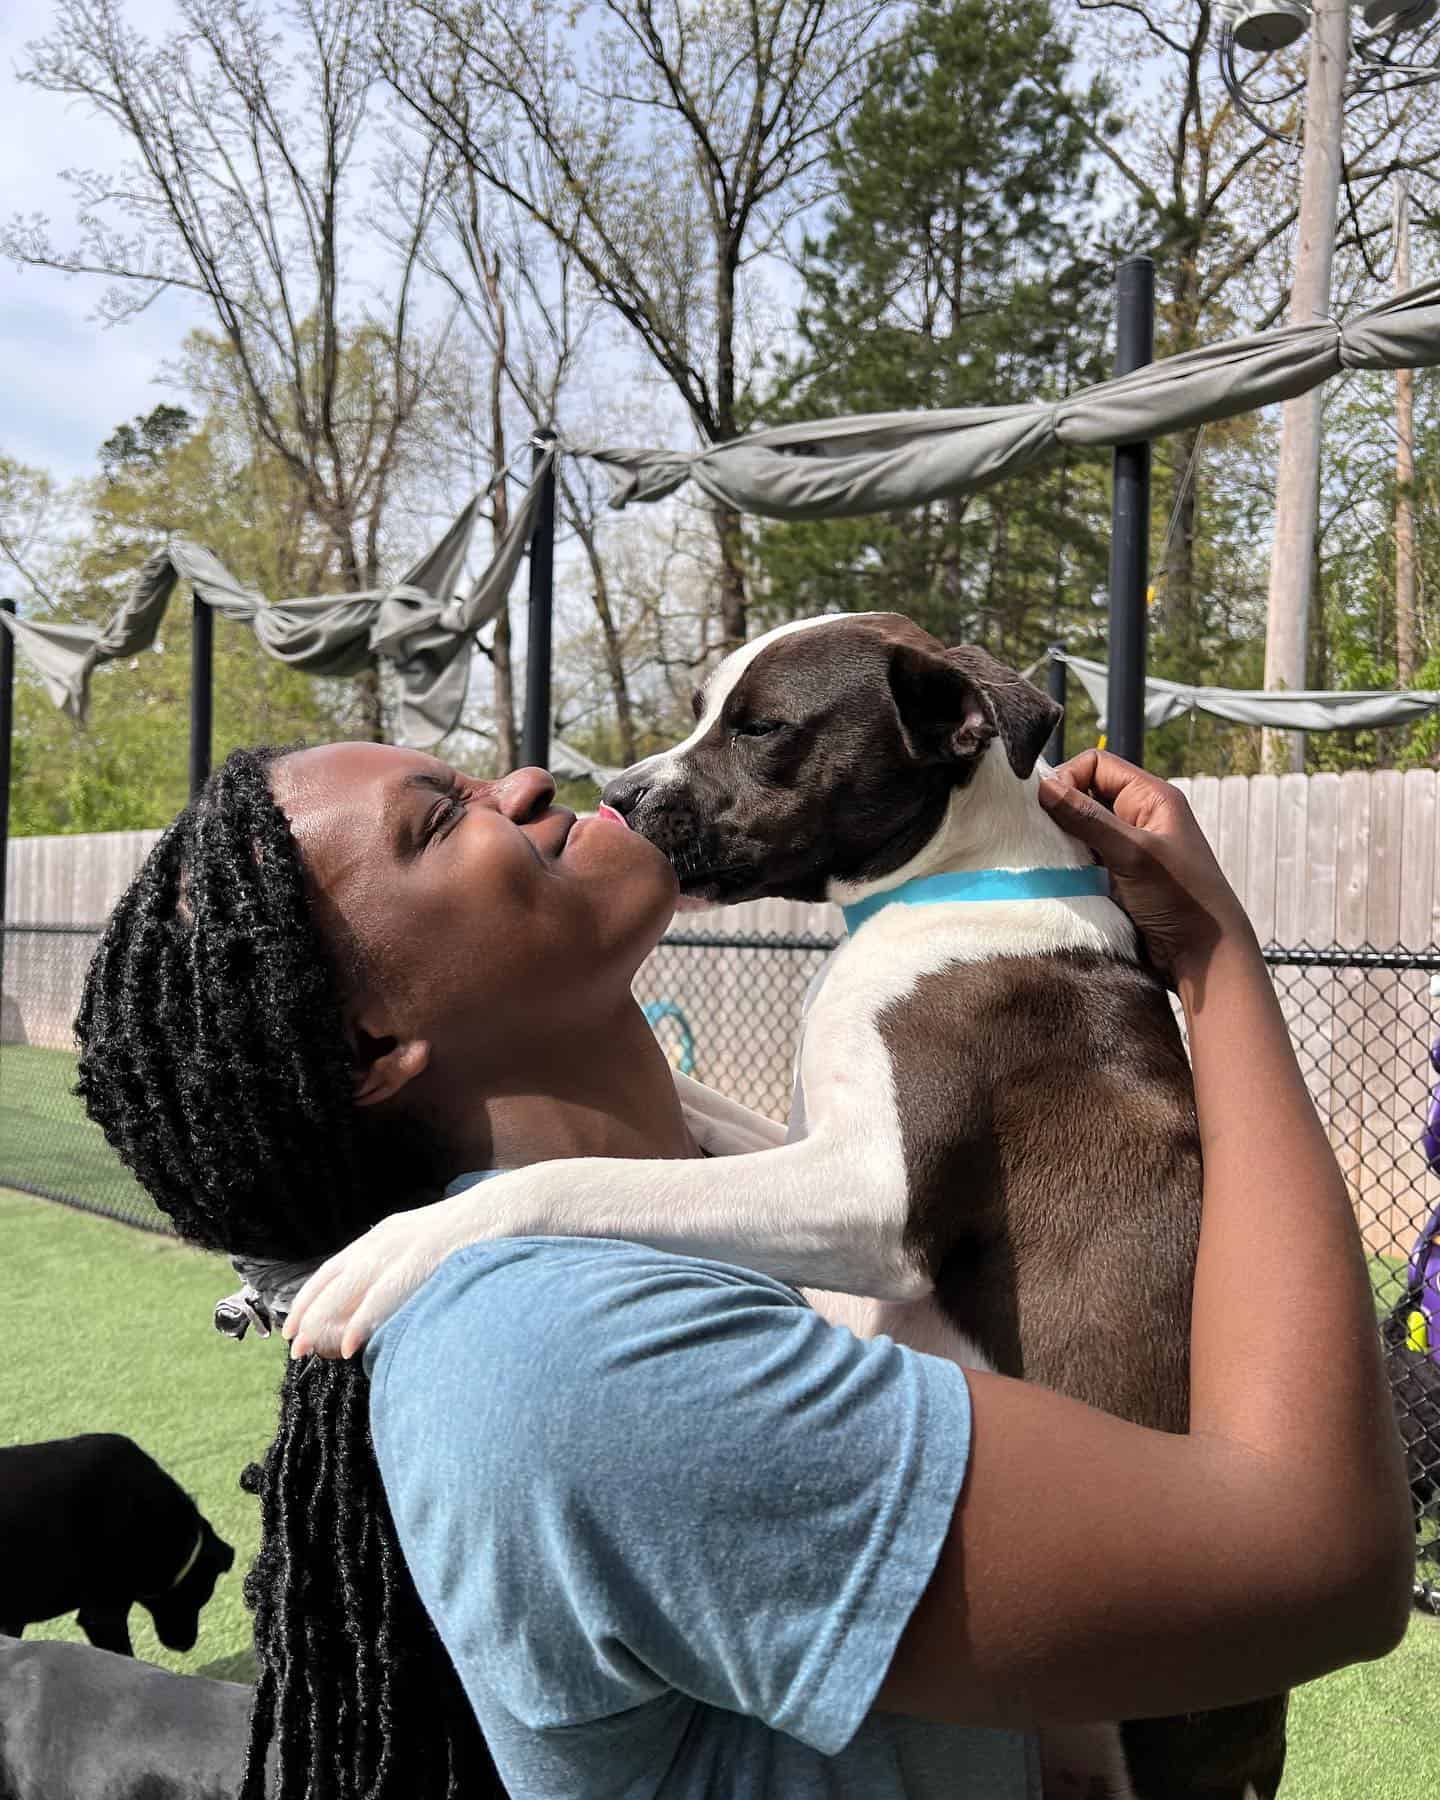 Dog and owner loving each other at a dog park in Arkansas